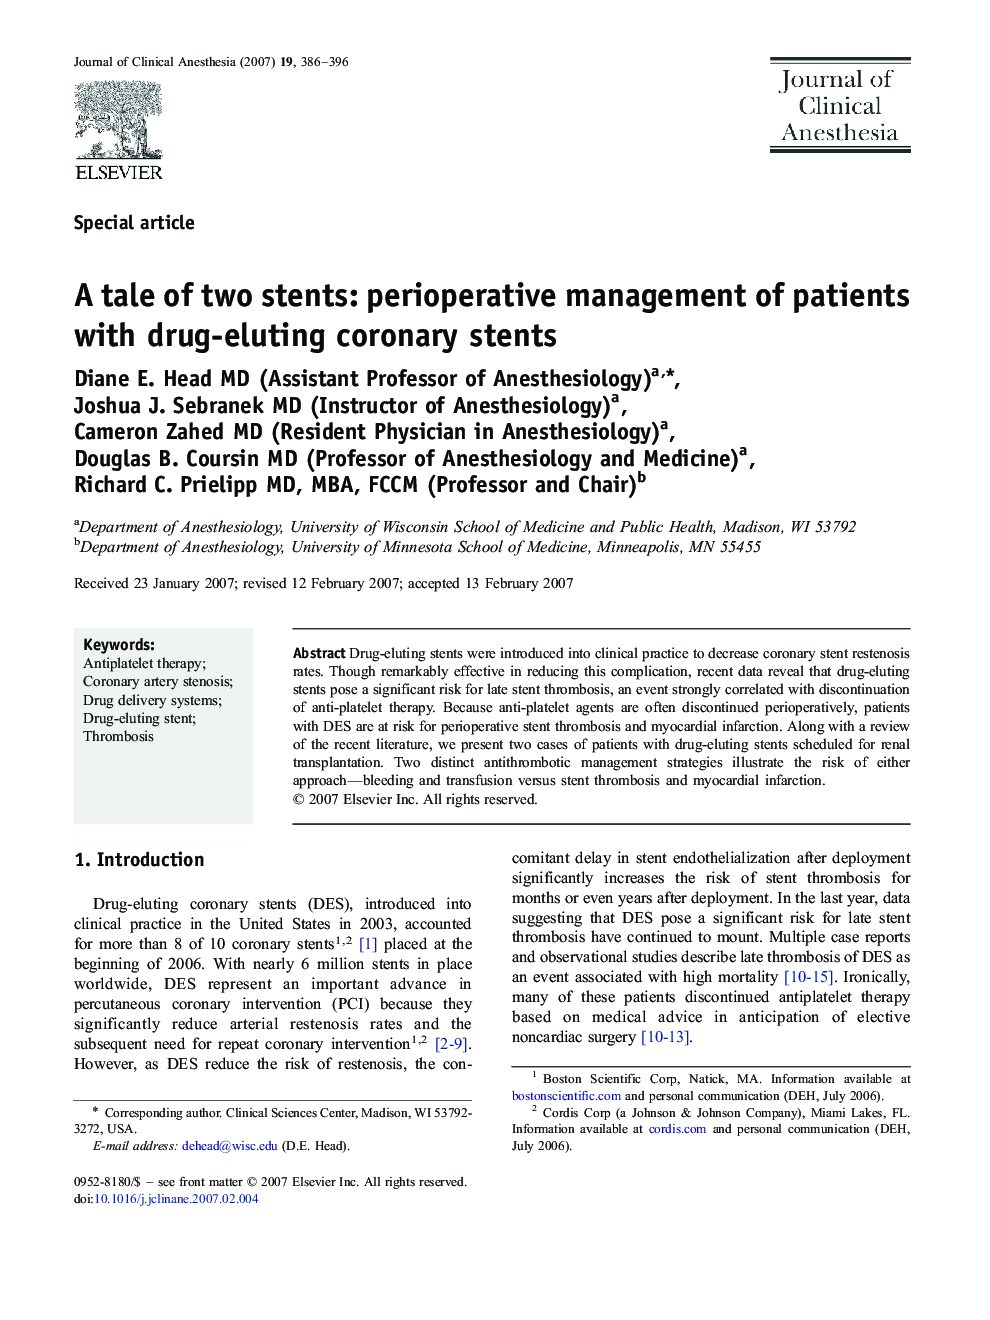 A tale of two stents: perioperative management of patients with drug-eluting coronary stents